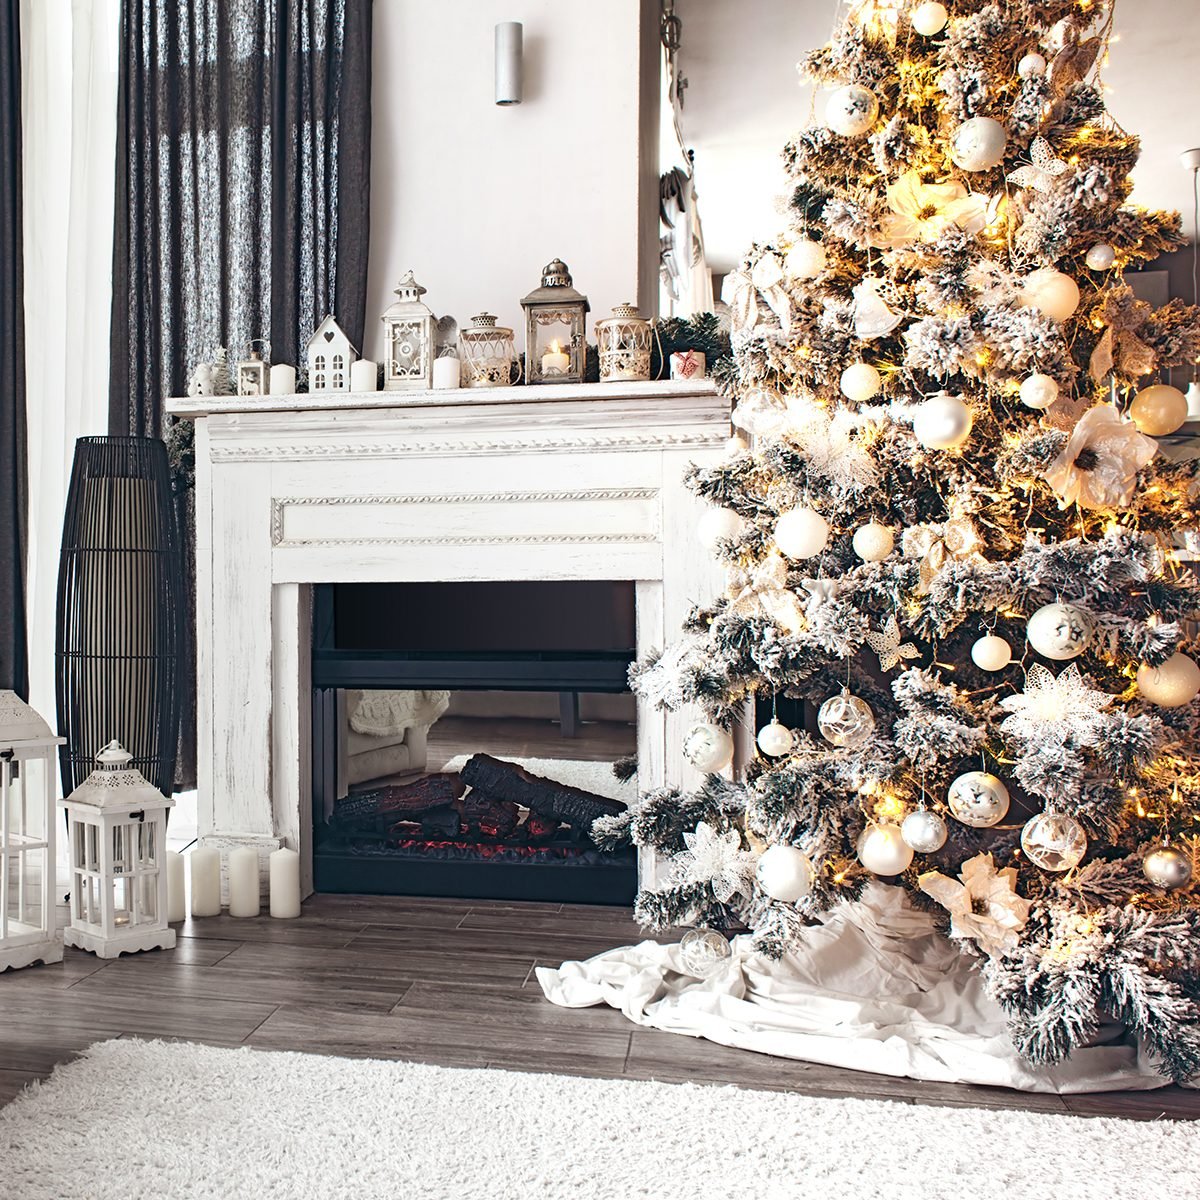 https://www.tasteofhome.com/wp-content/uploads/2019/12/beautiful-holiday-decorated-room-christmas-tree-shutterstock_521077567.jpg?fit=700%2C700